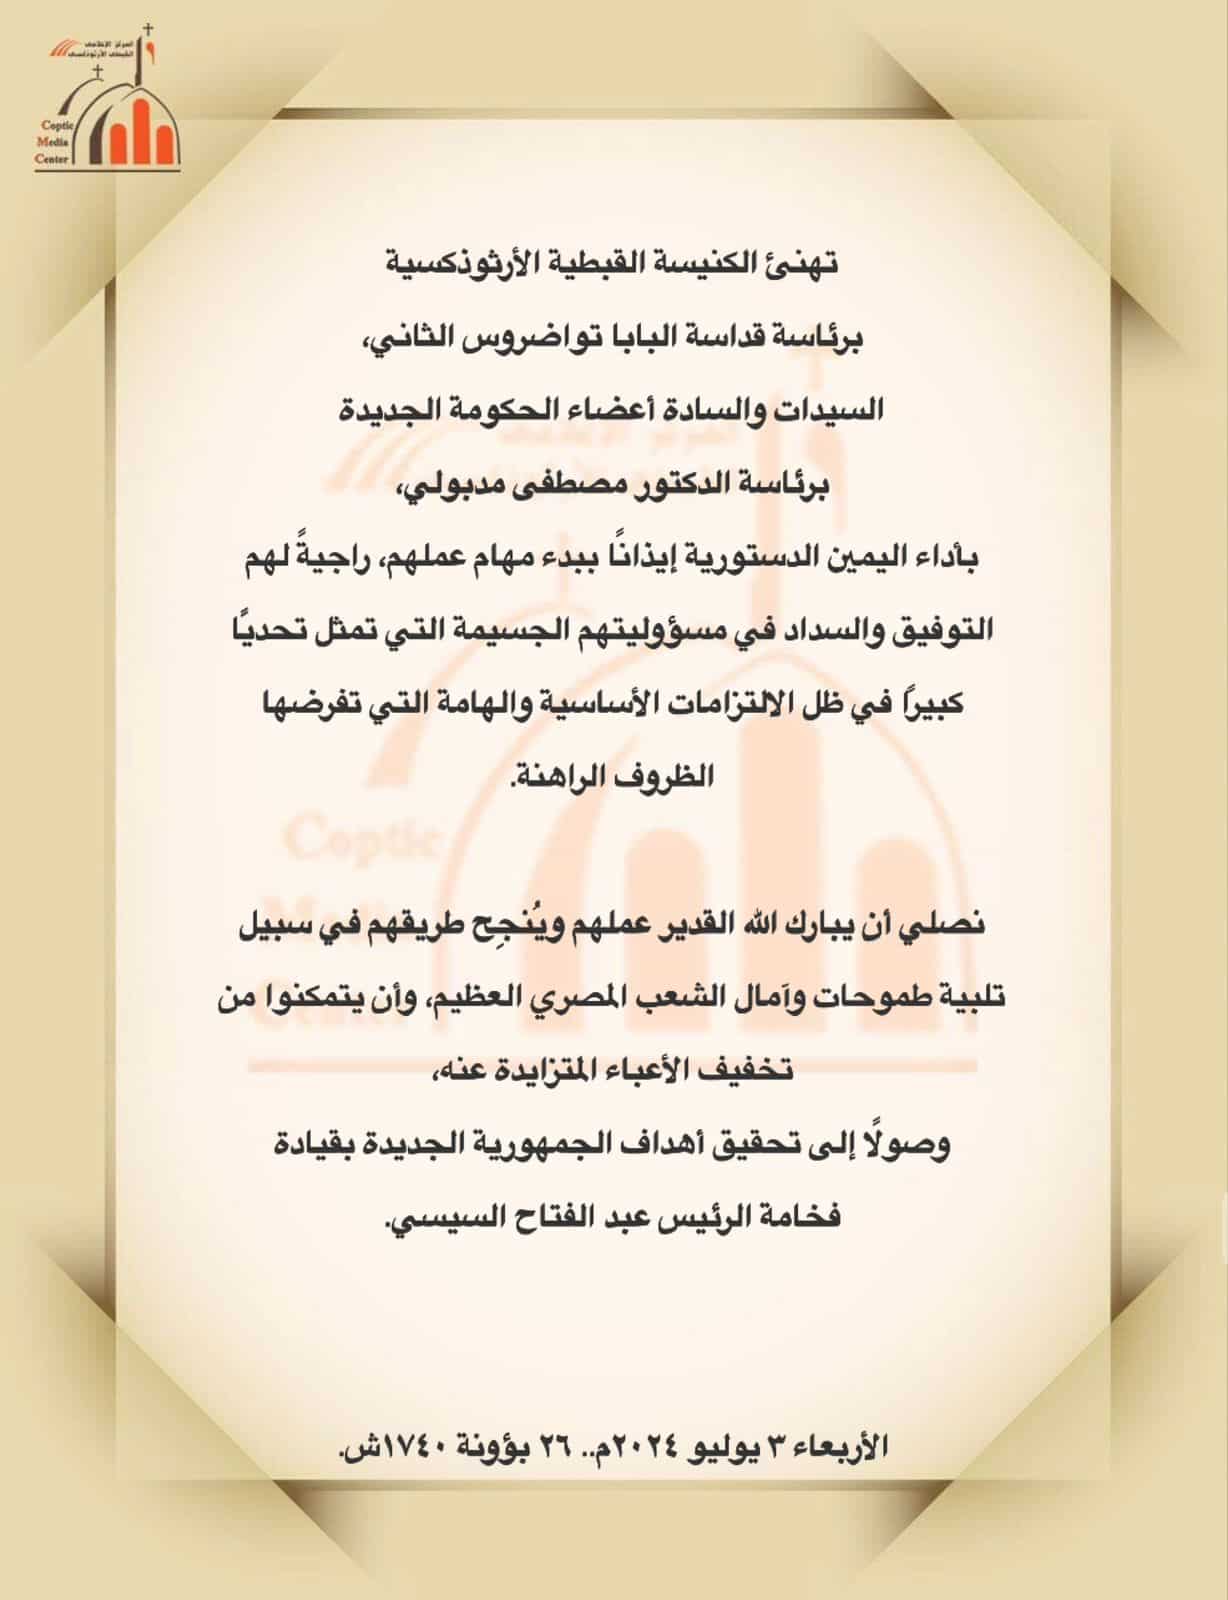 The Coptic Orthodox Church congratulates the New Government headed by Dr. Mostafa Madbouly